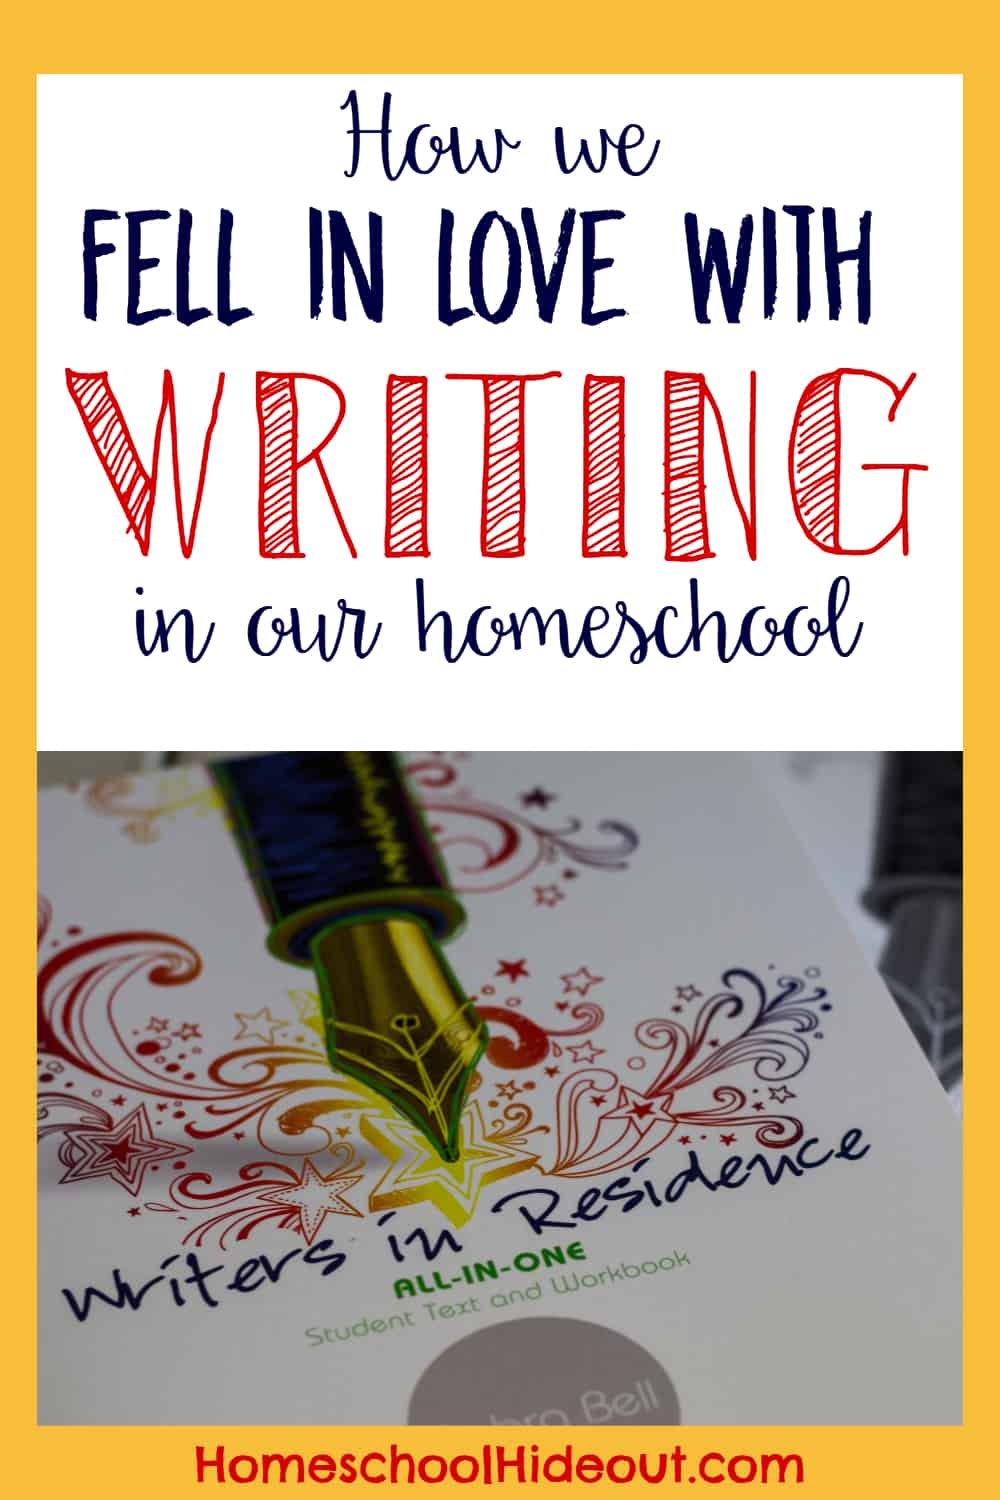 Writers in Residence is the most engaging homeschool writing curriculum we've found! The kids are LOVING it!